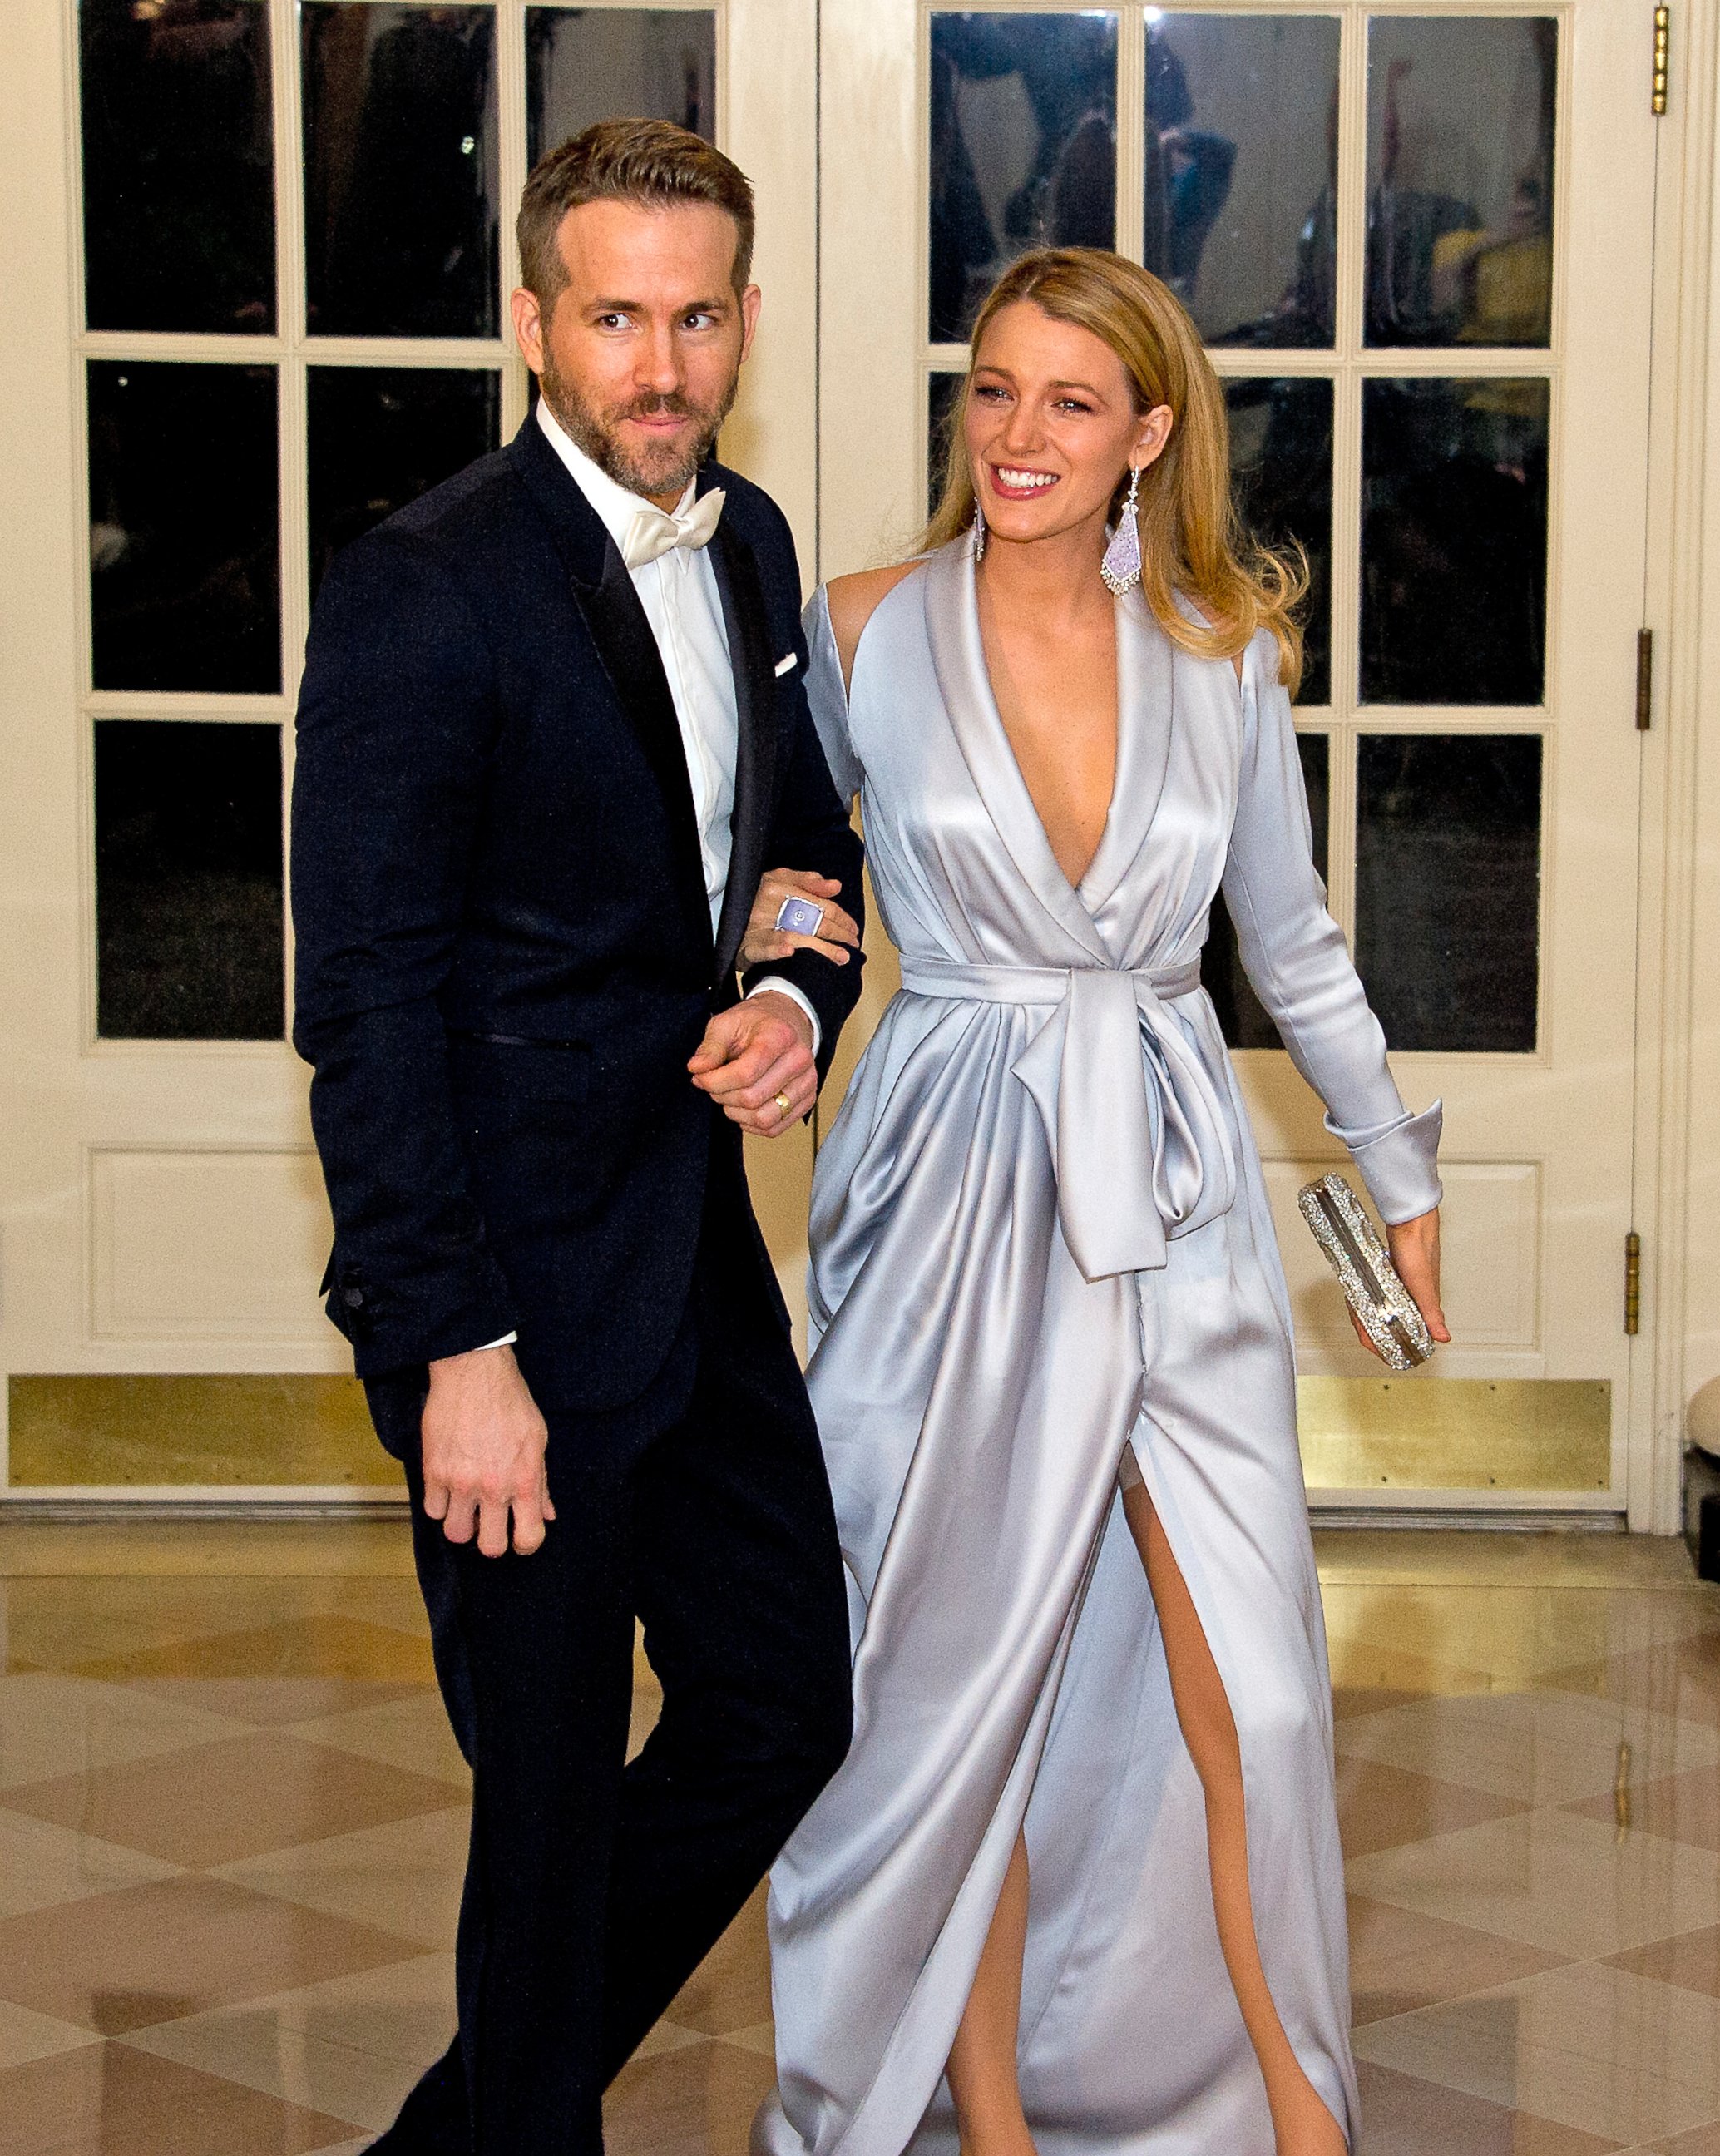 PHOTO: Actors Ryan Reynolds and Blake Lively arrive for the State Dinner in honor of Prime Minister Trudeau and Mrs. Sophie Trudeau of Canada at the White House, March 10, 2016, in Washington.